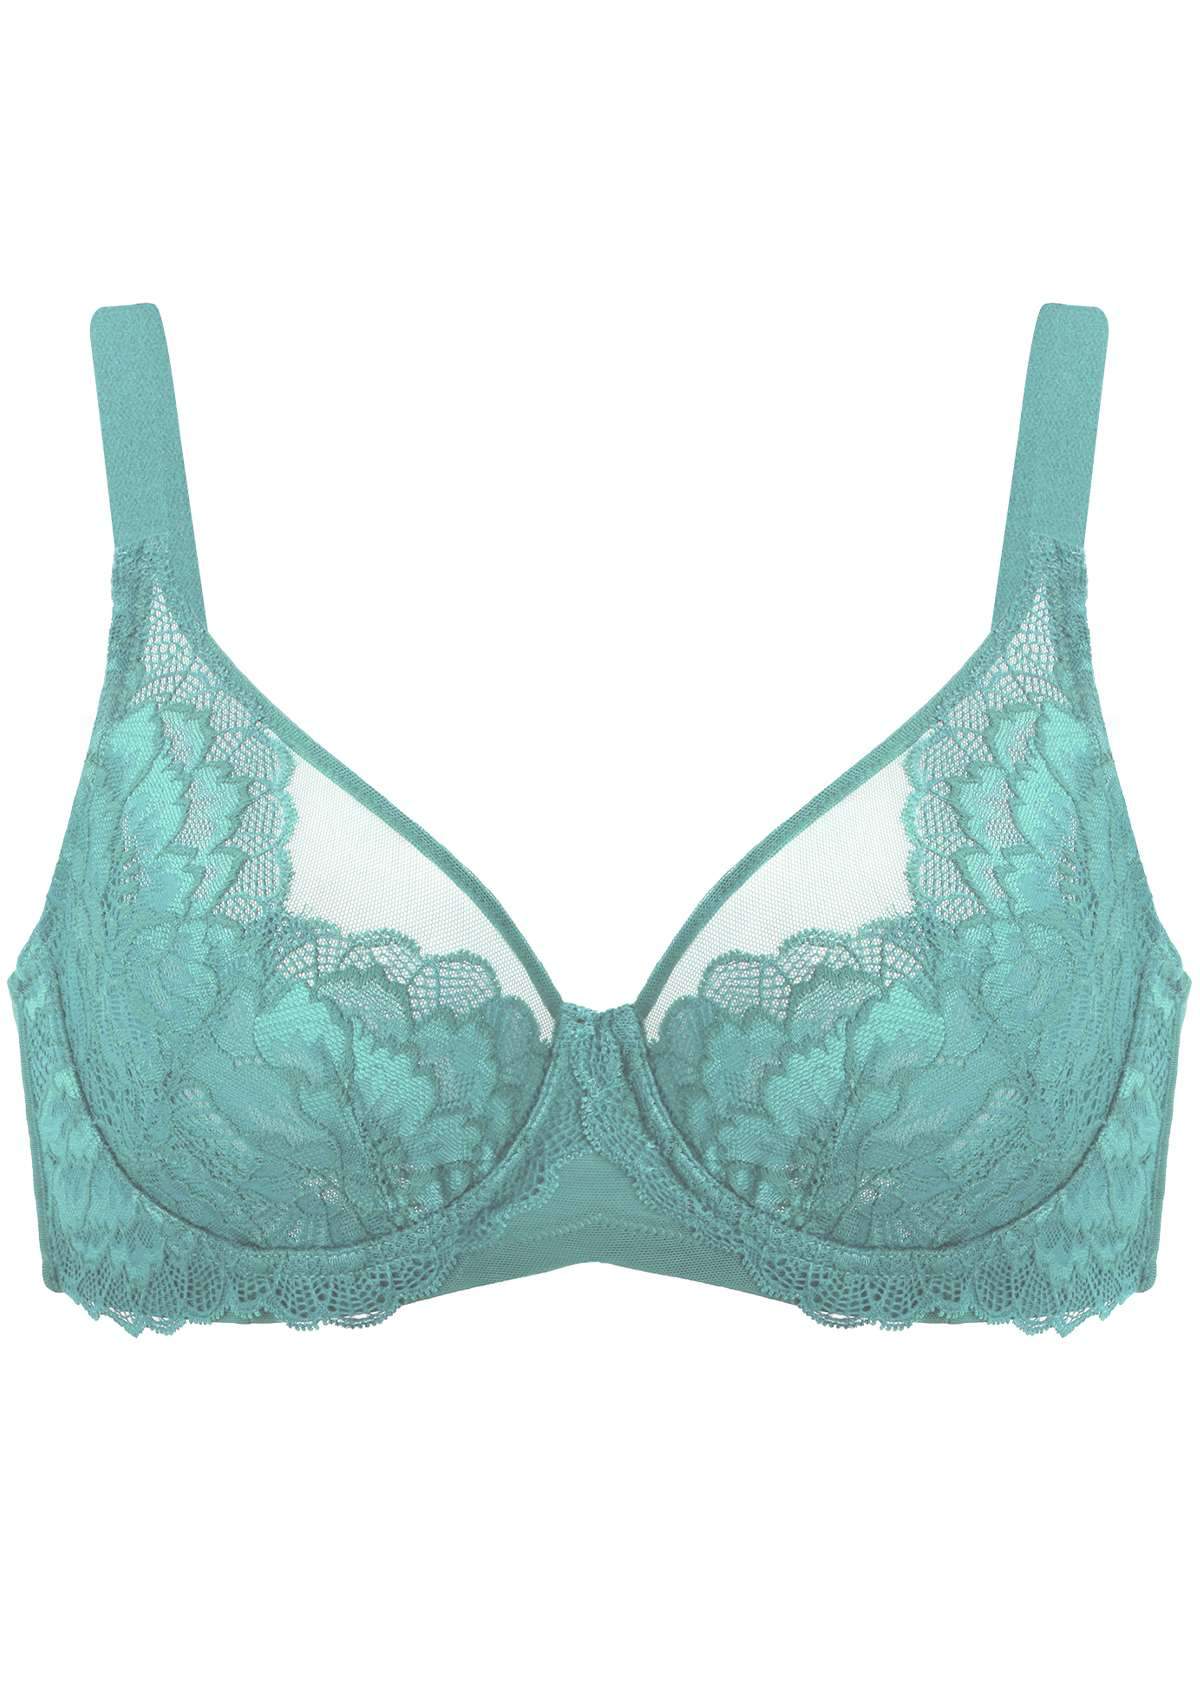 HSIA Peony Lace Unlined Supportive Underwire Bra - Light Coral / 34 / C